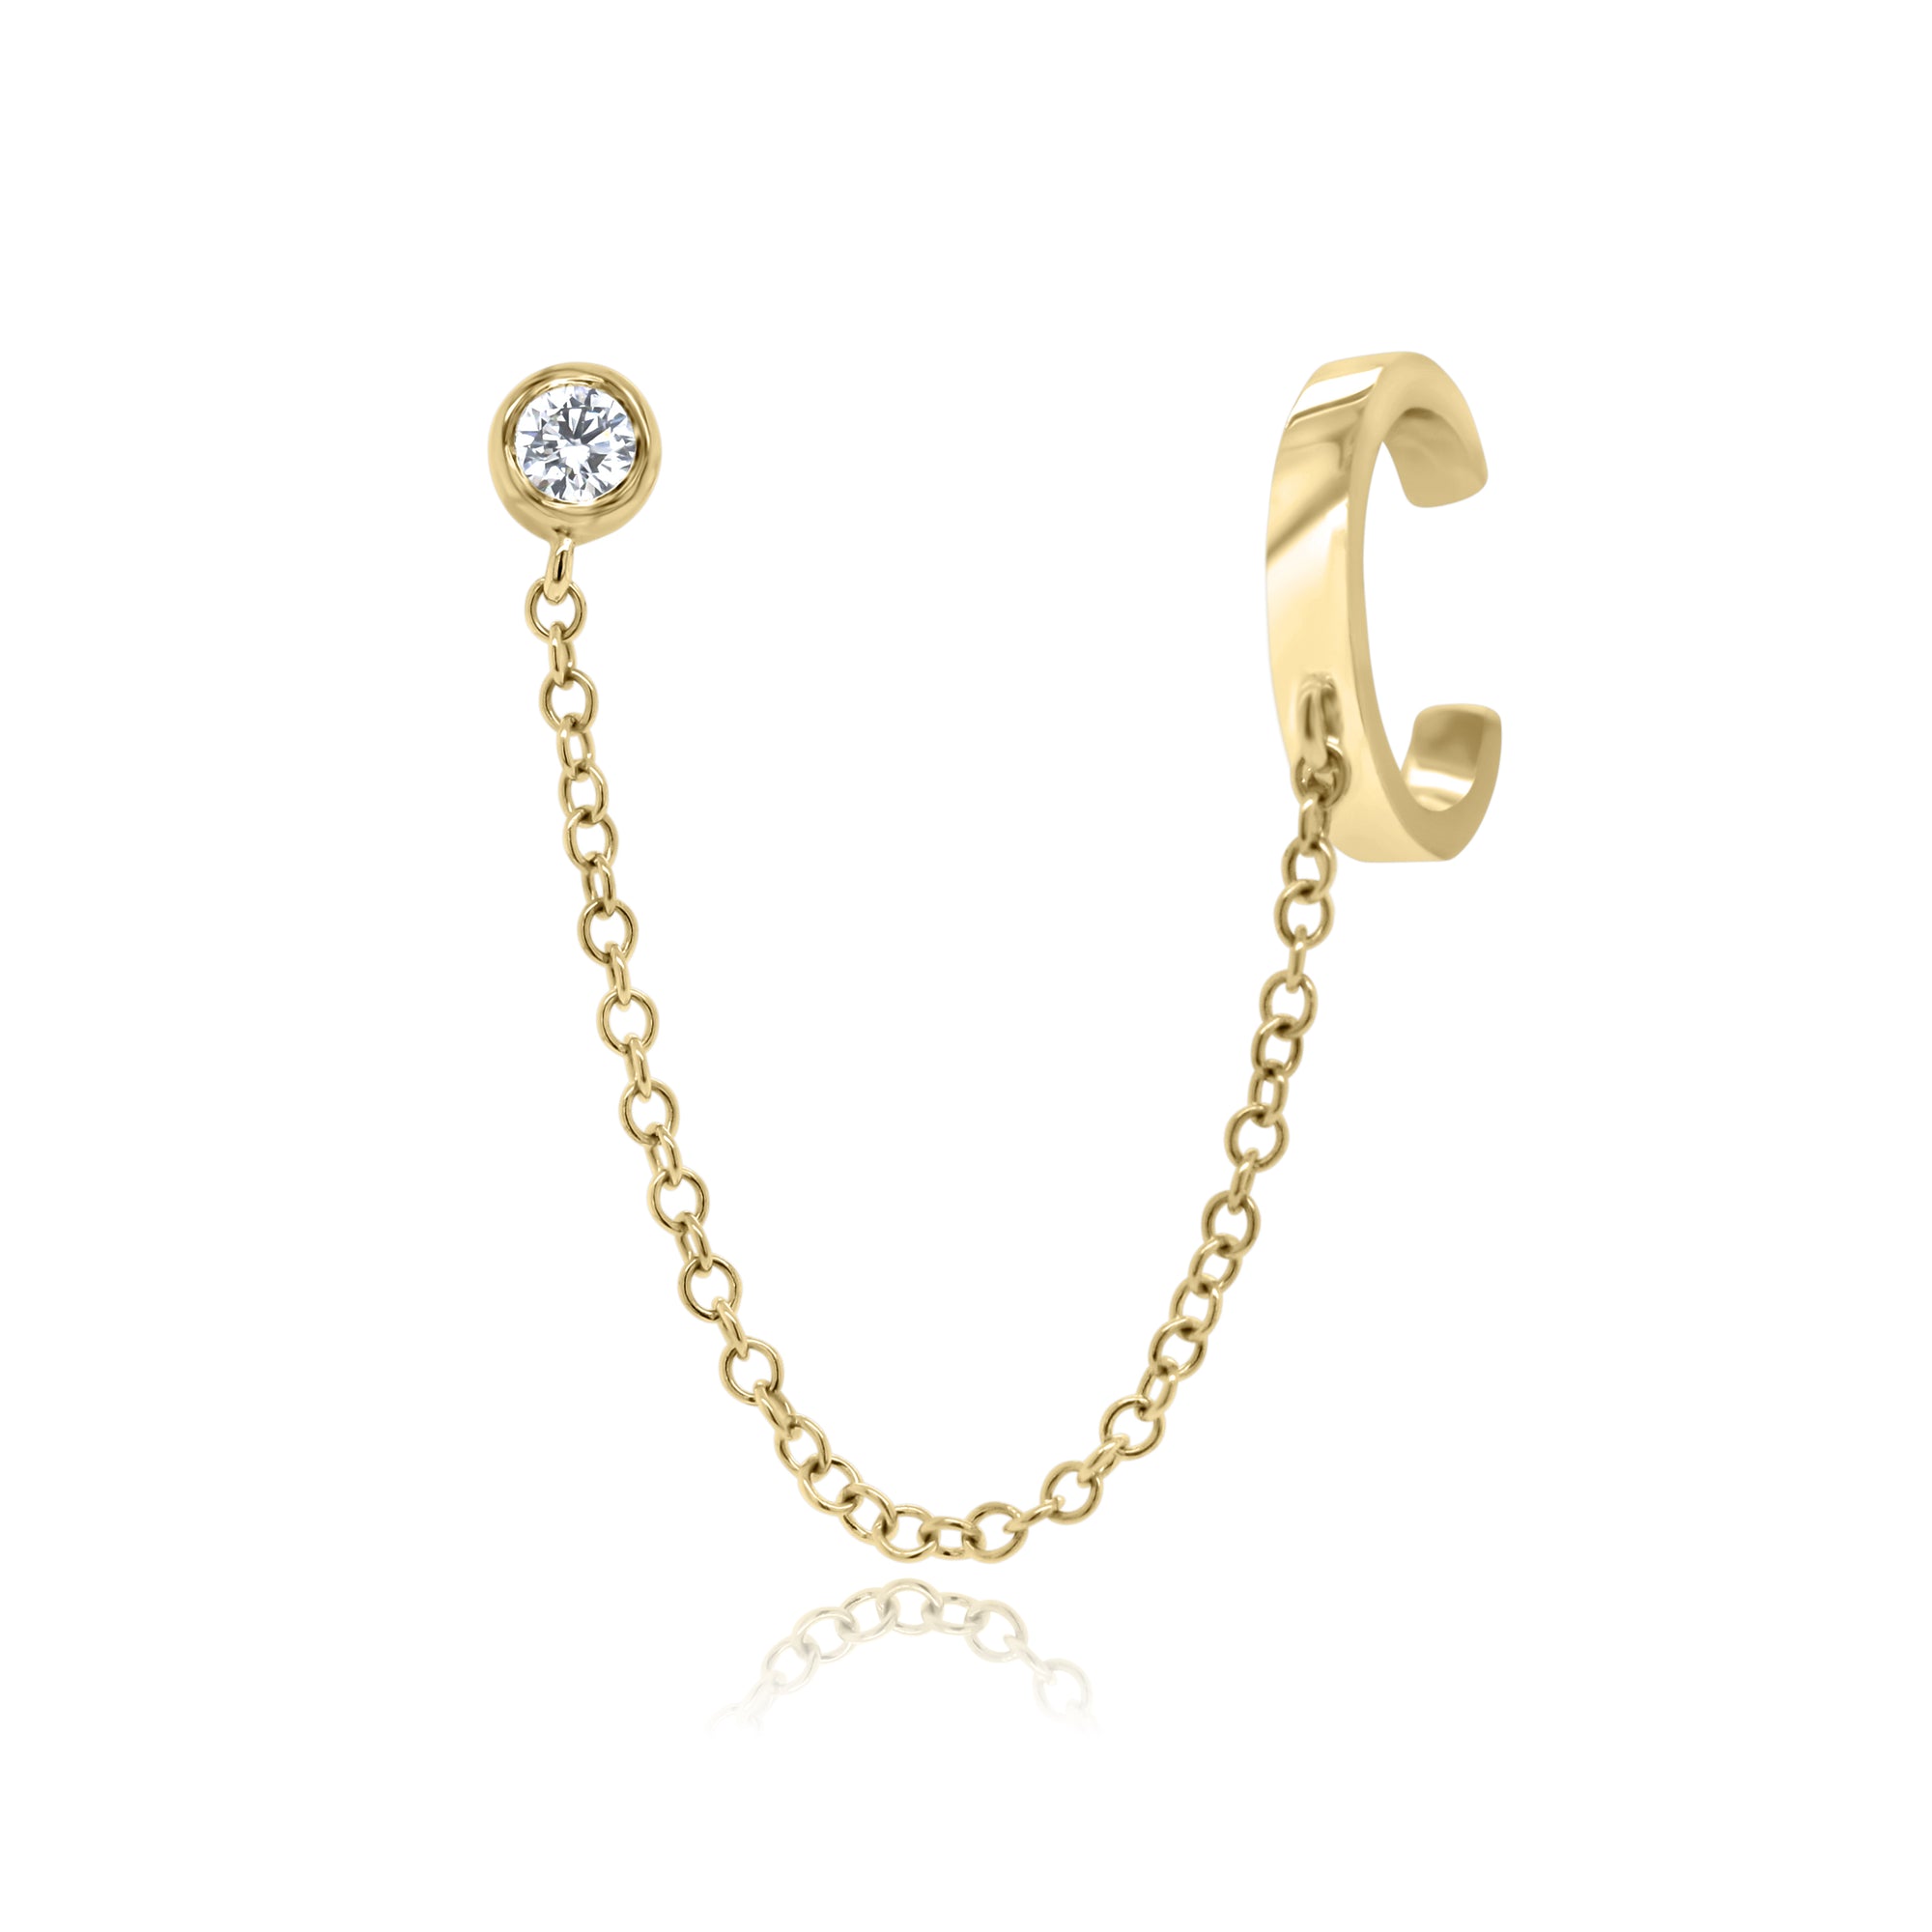 Ear Cuff with Chain and Bezel-Set Diamond Stud - 14K yellow gold weighing 1.14 grams - 1 round diamond totaling 0.05 ct.